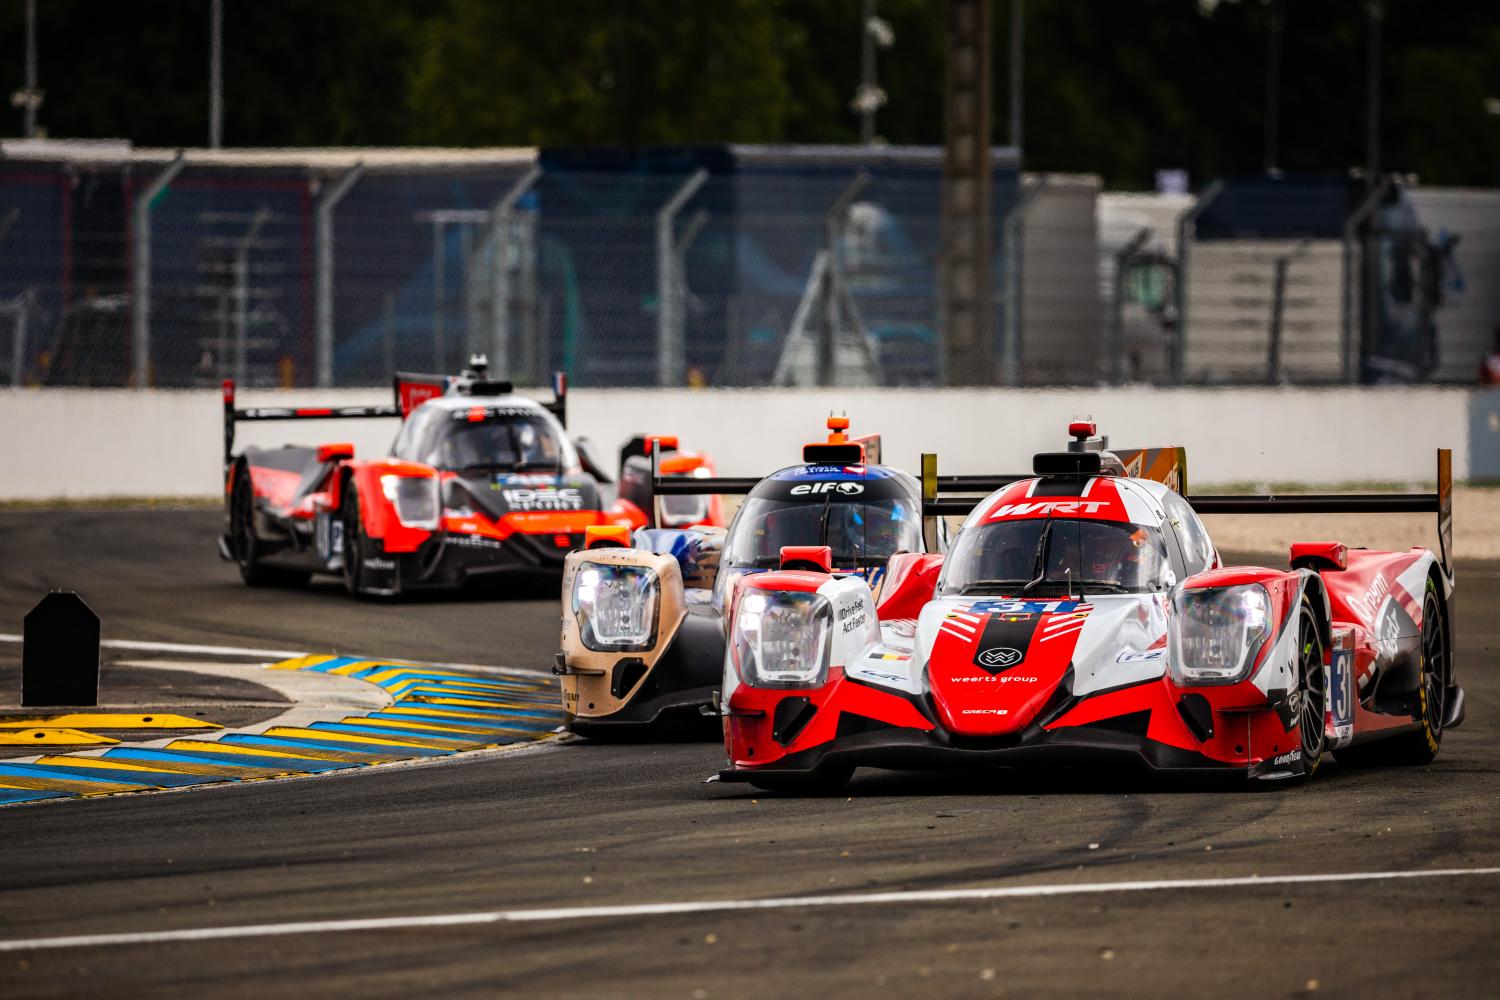 Le Mans 2022 Schedule Who Has Booked Their Place On The 2022 24 Hours Of Le Mans Grid? | 24H- Lemans.com